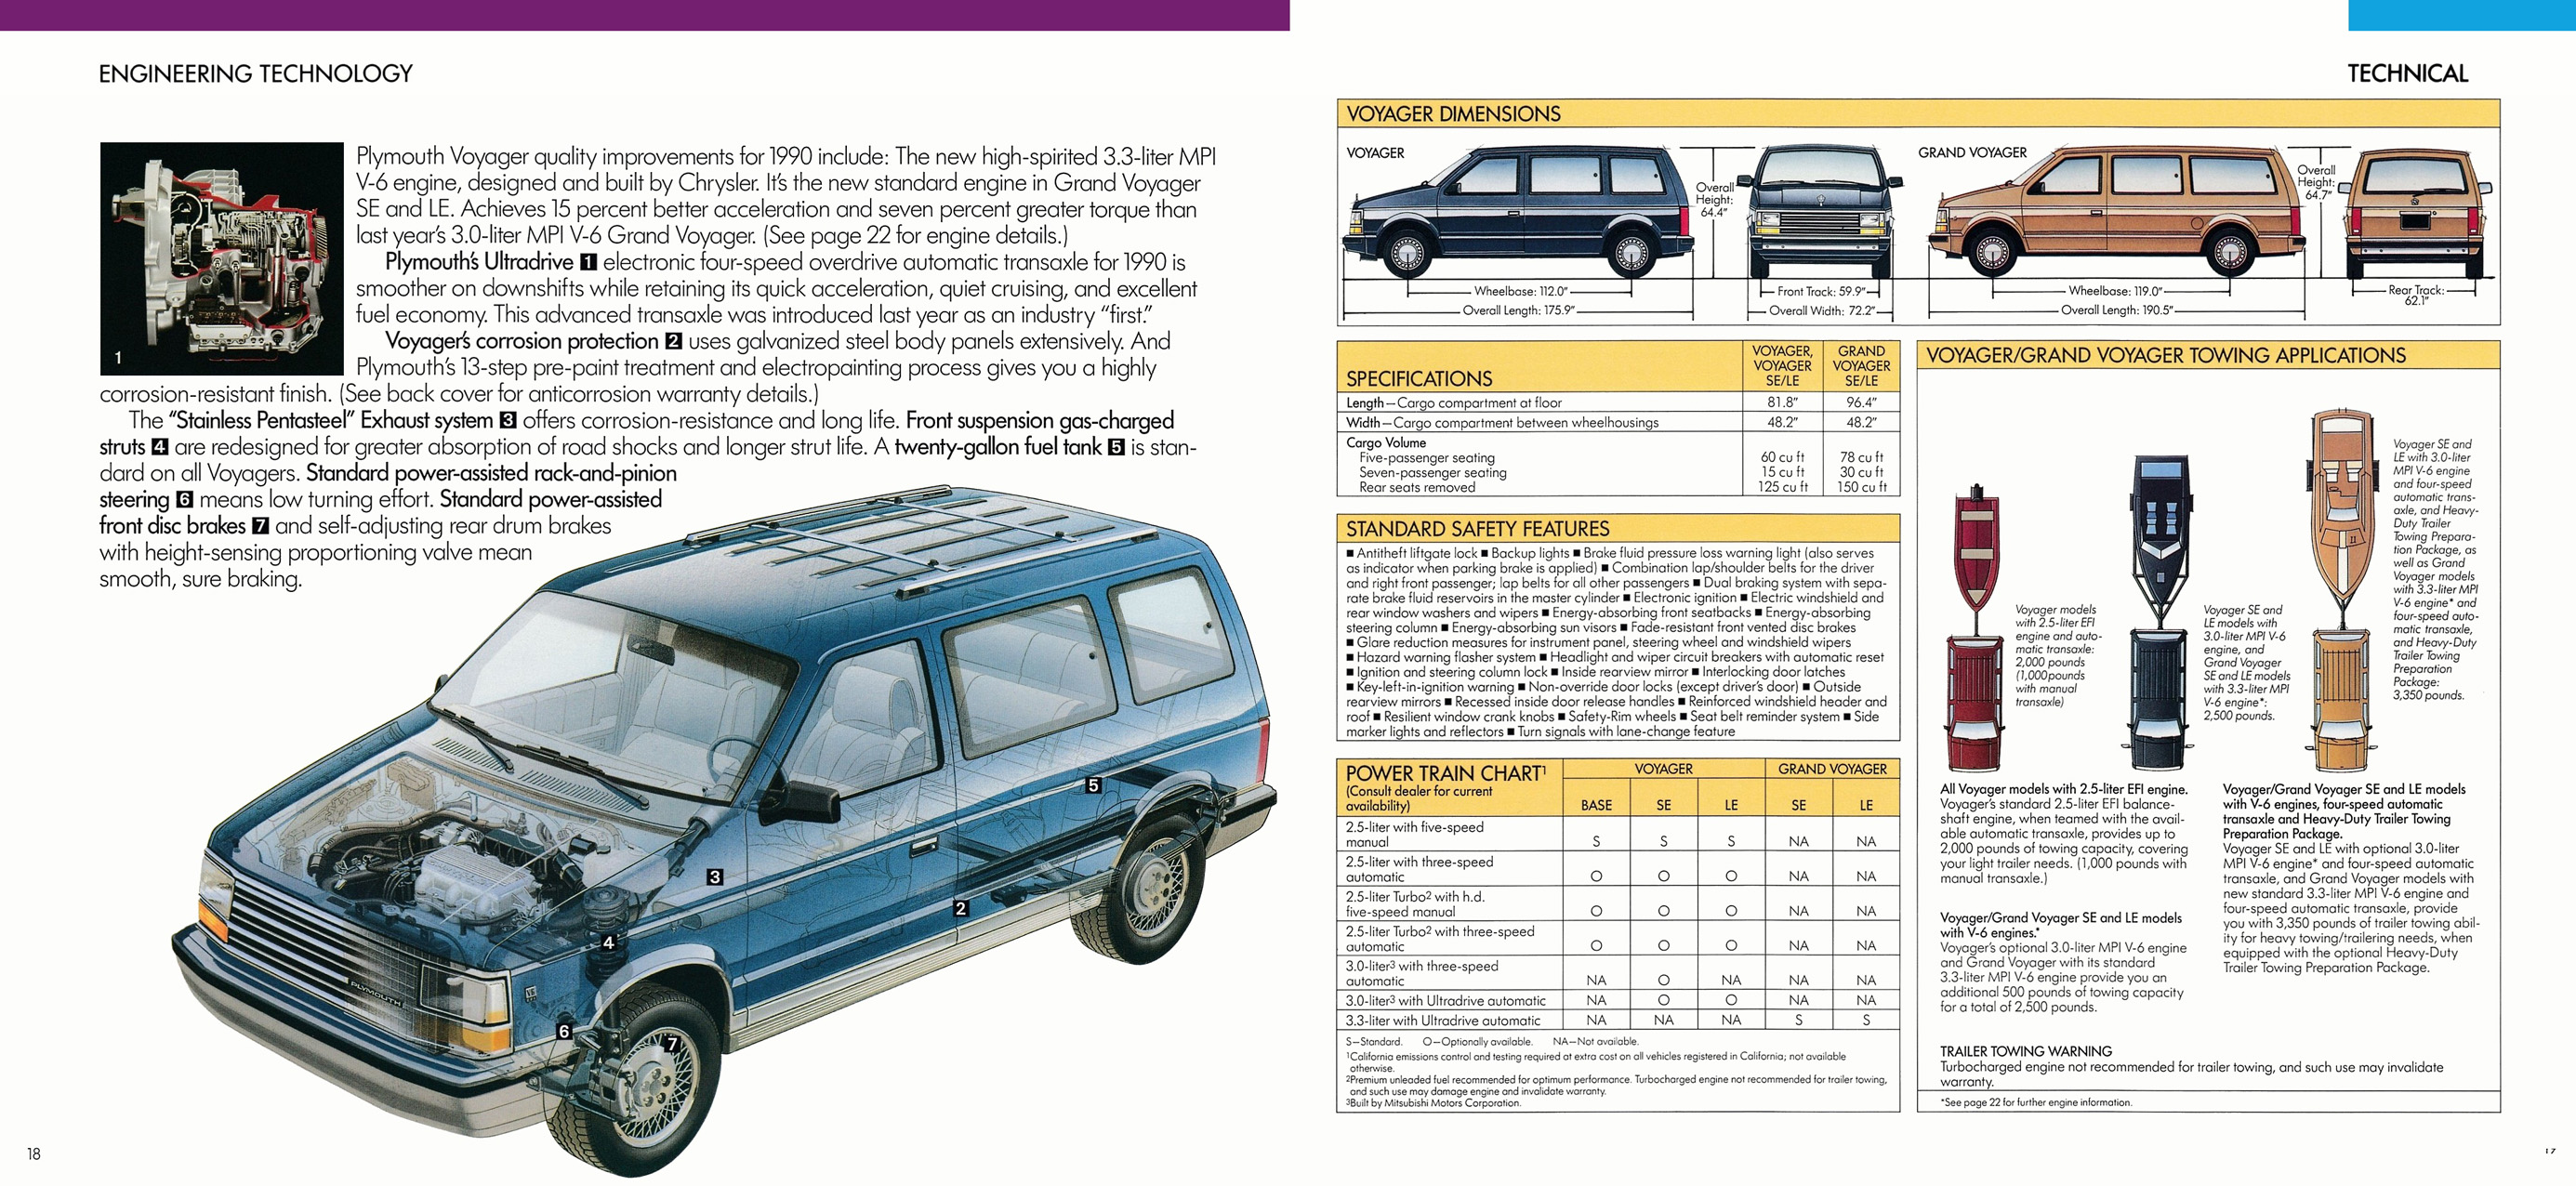 1990 Plymouth Voyager Brochure 18-19